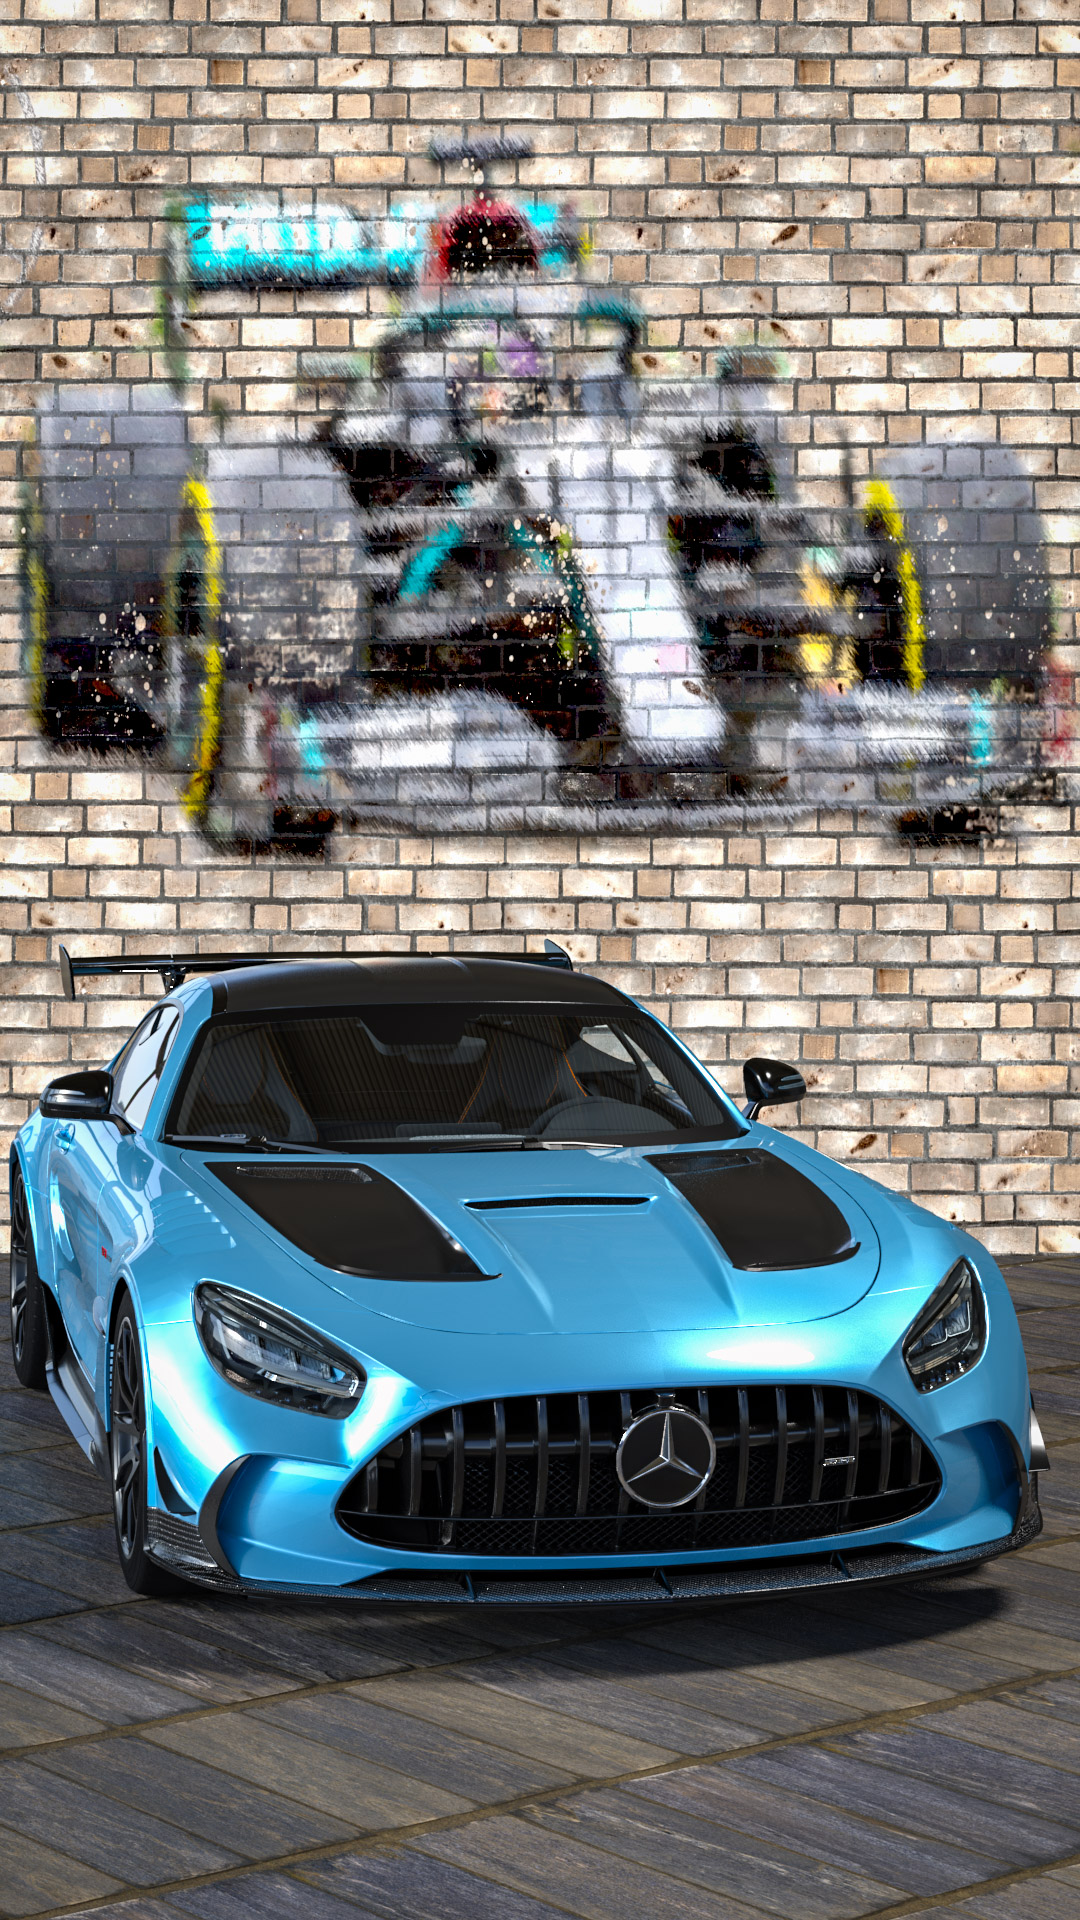 Experience the thrill of the Mercedes AMG GT with our car HD wallpaper for phone, showcasing the pinnacle of German engineering.